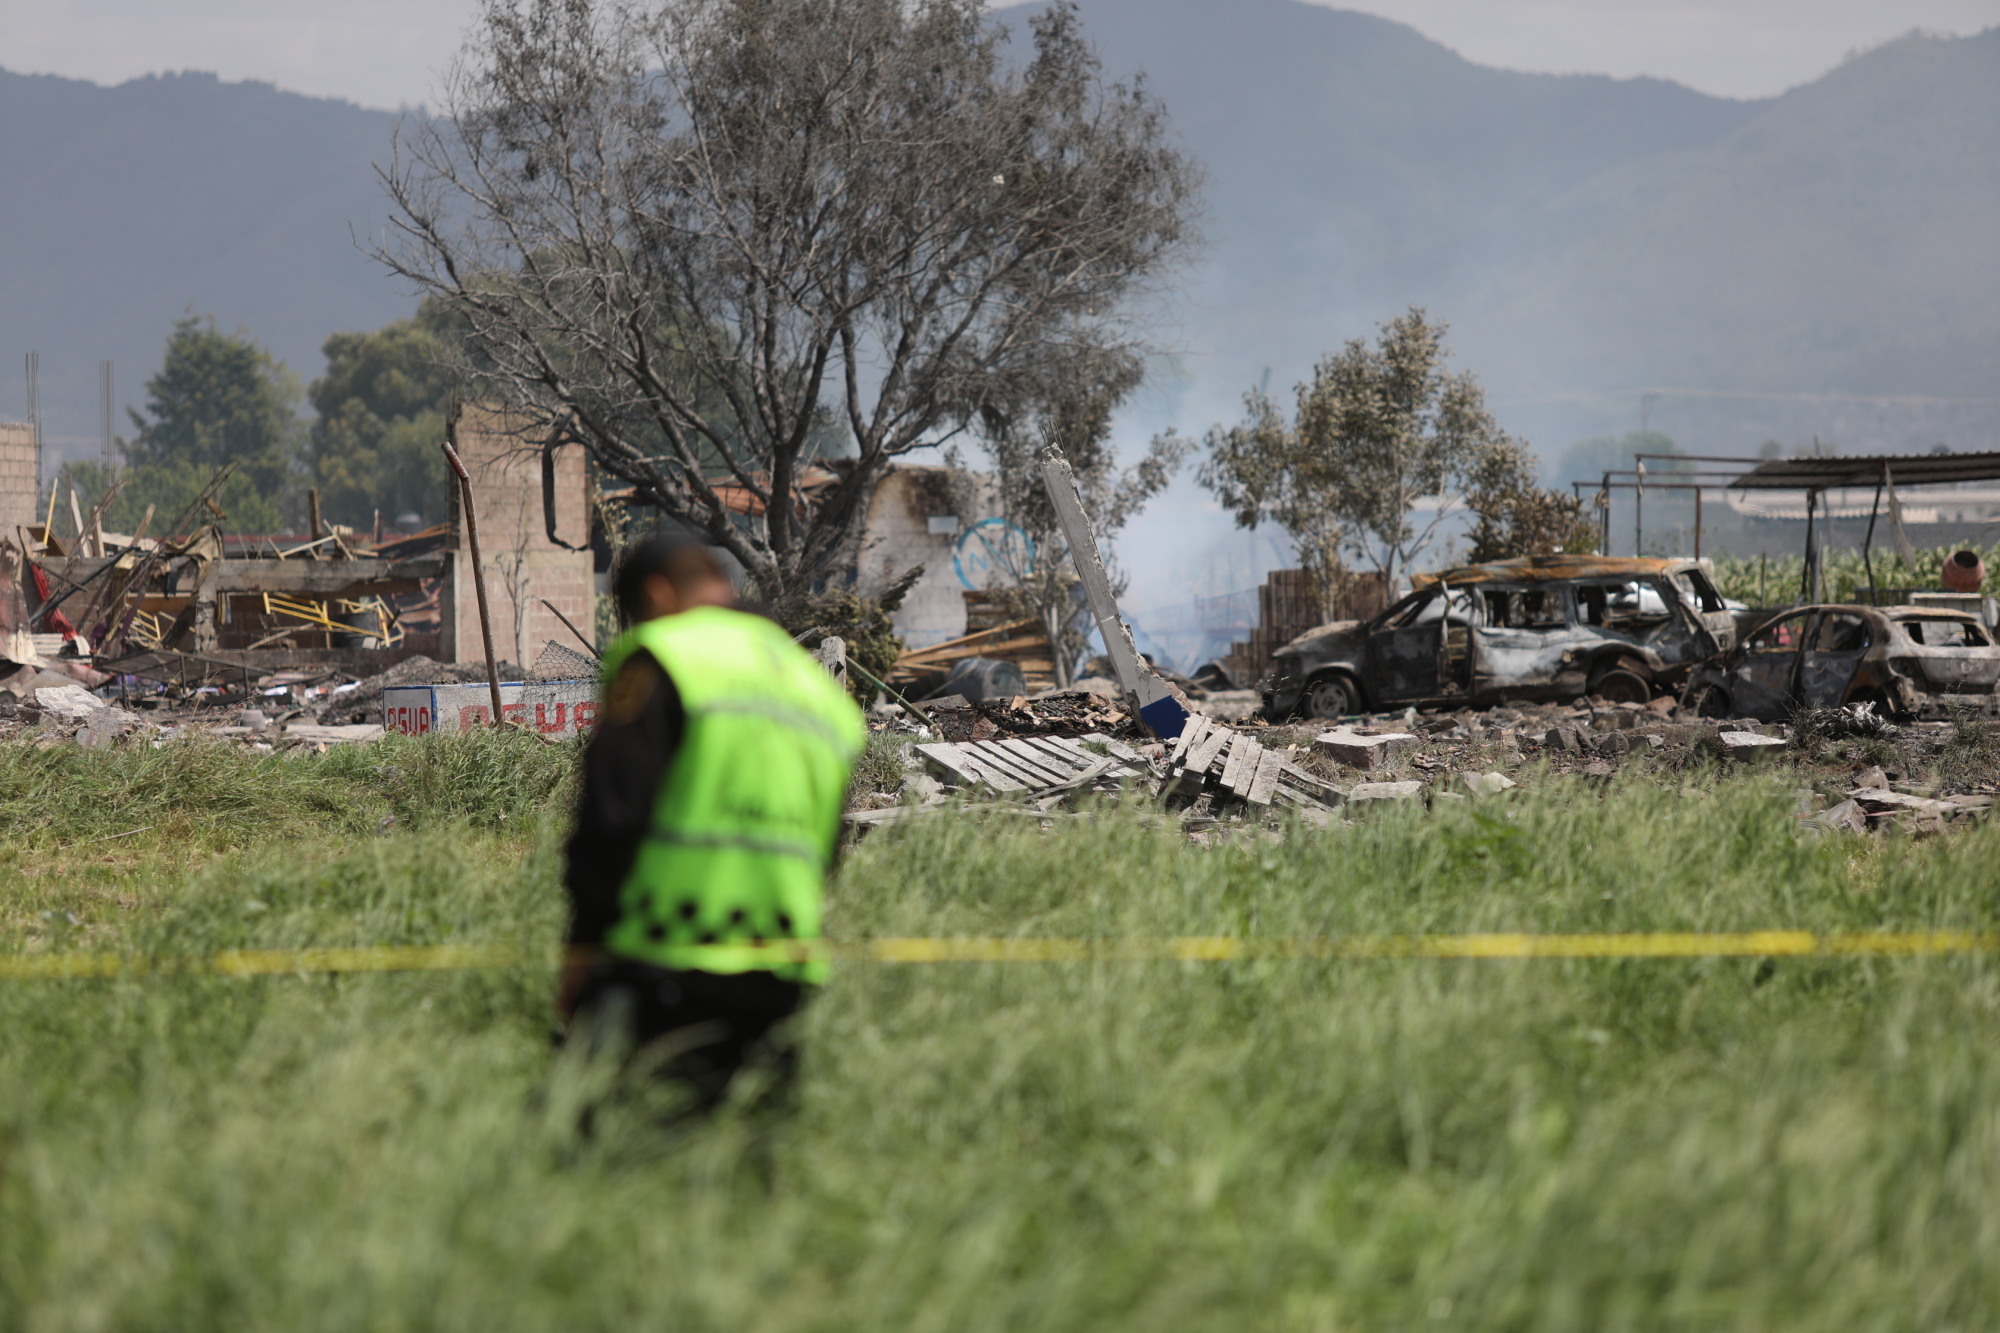 A police officer guards the perimeter around the wreckage of several fireworks workshops in Tultepec, Mexico, Thursday. More than a dozen people were killed and at least 40 injured when a series of explosions ripped through fireworks workshops in the town just north of Mexico City. | AP